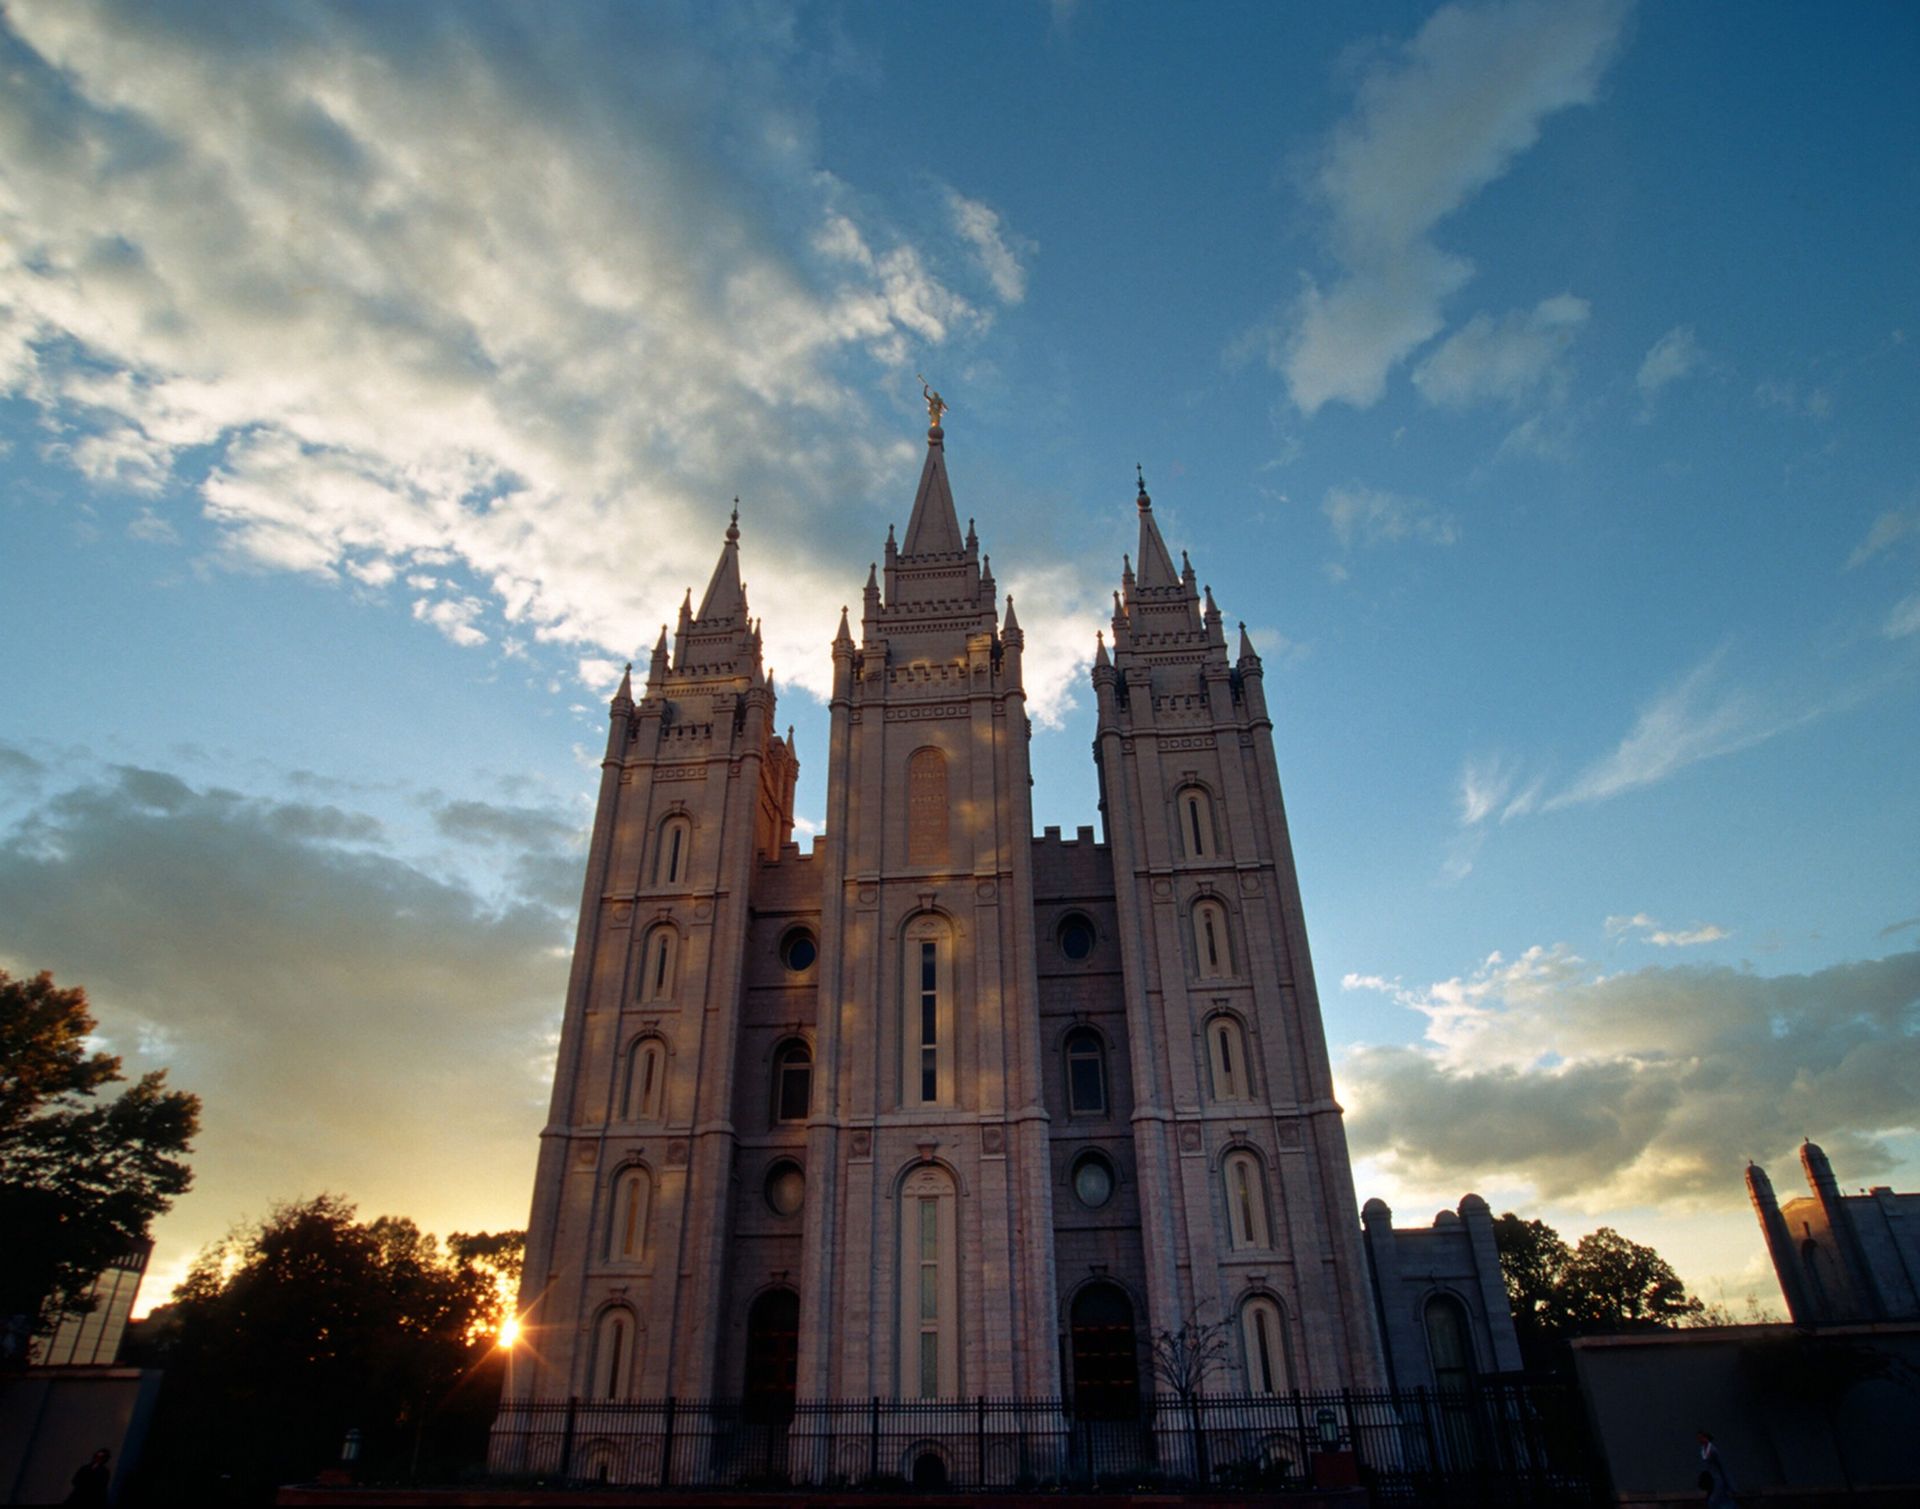 The Salt Lake Temple at dusk, including sky and scenery.